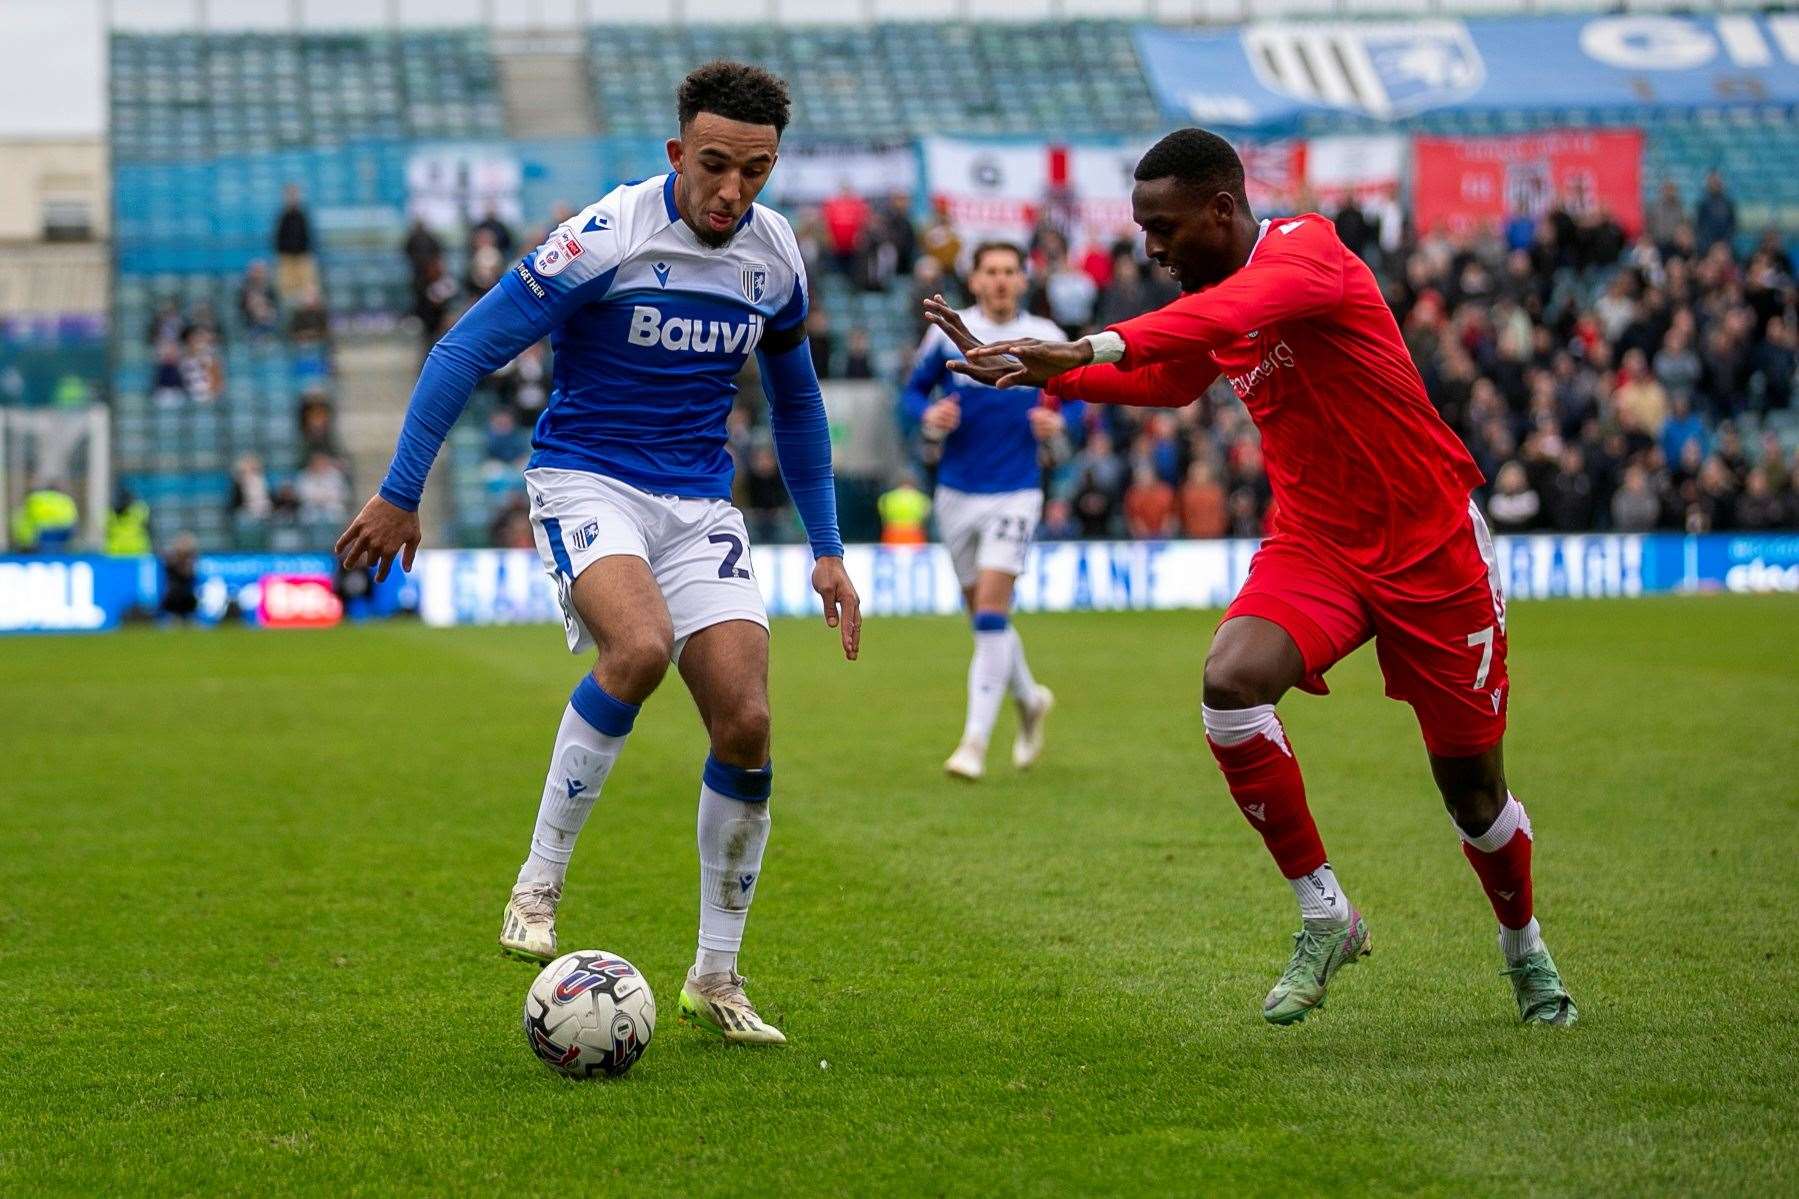 Remeao Hutton taking on a defender at Priestfield Picture: @Julian_KPI